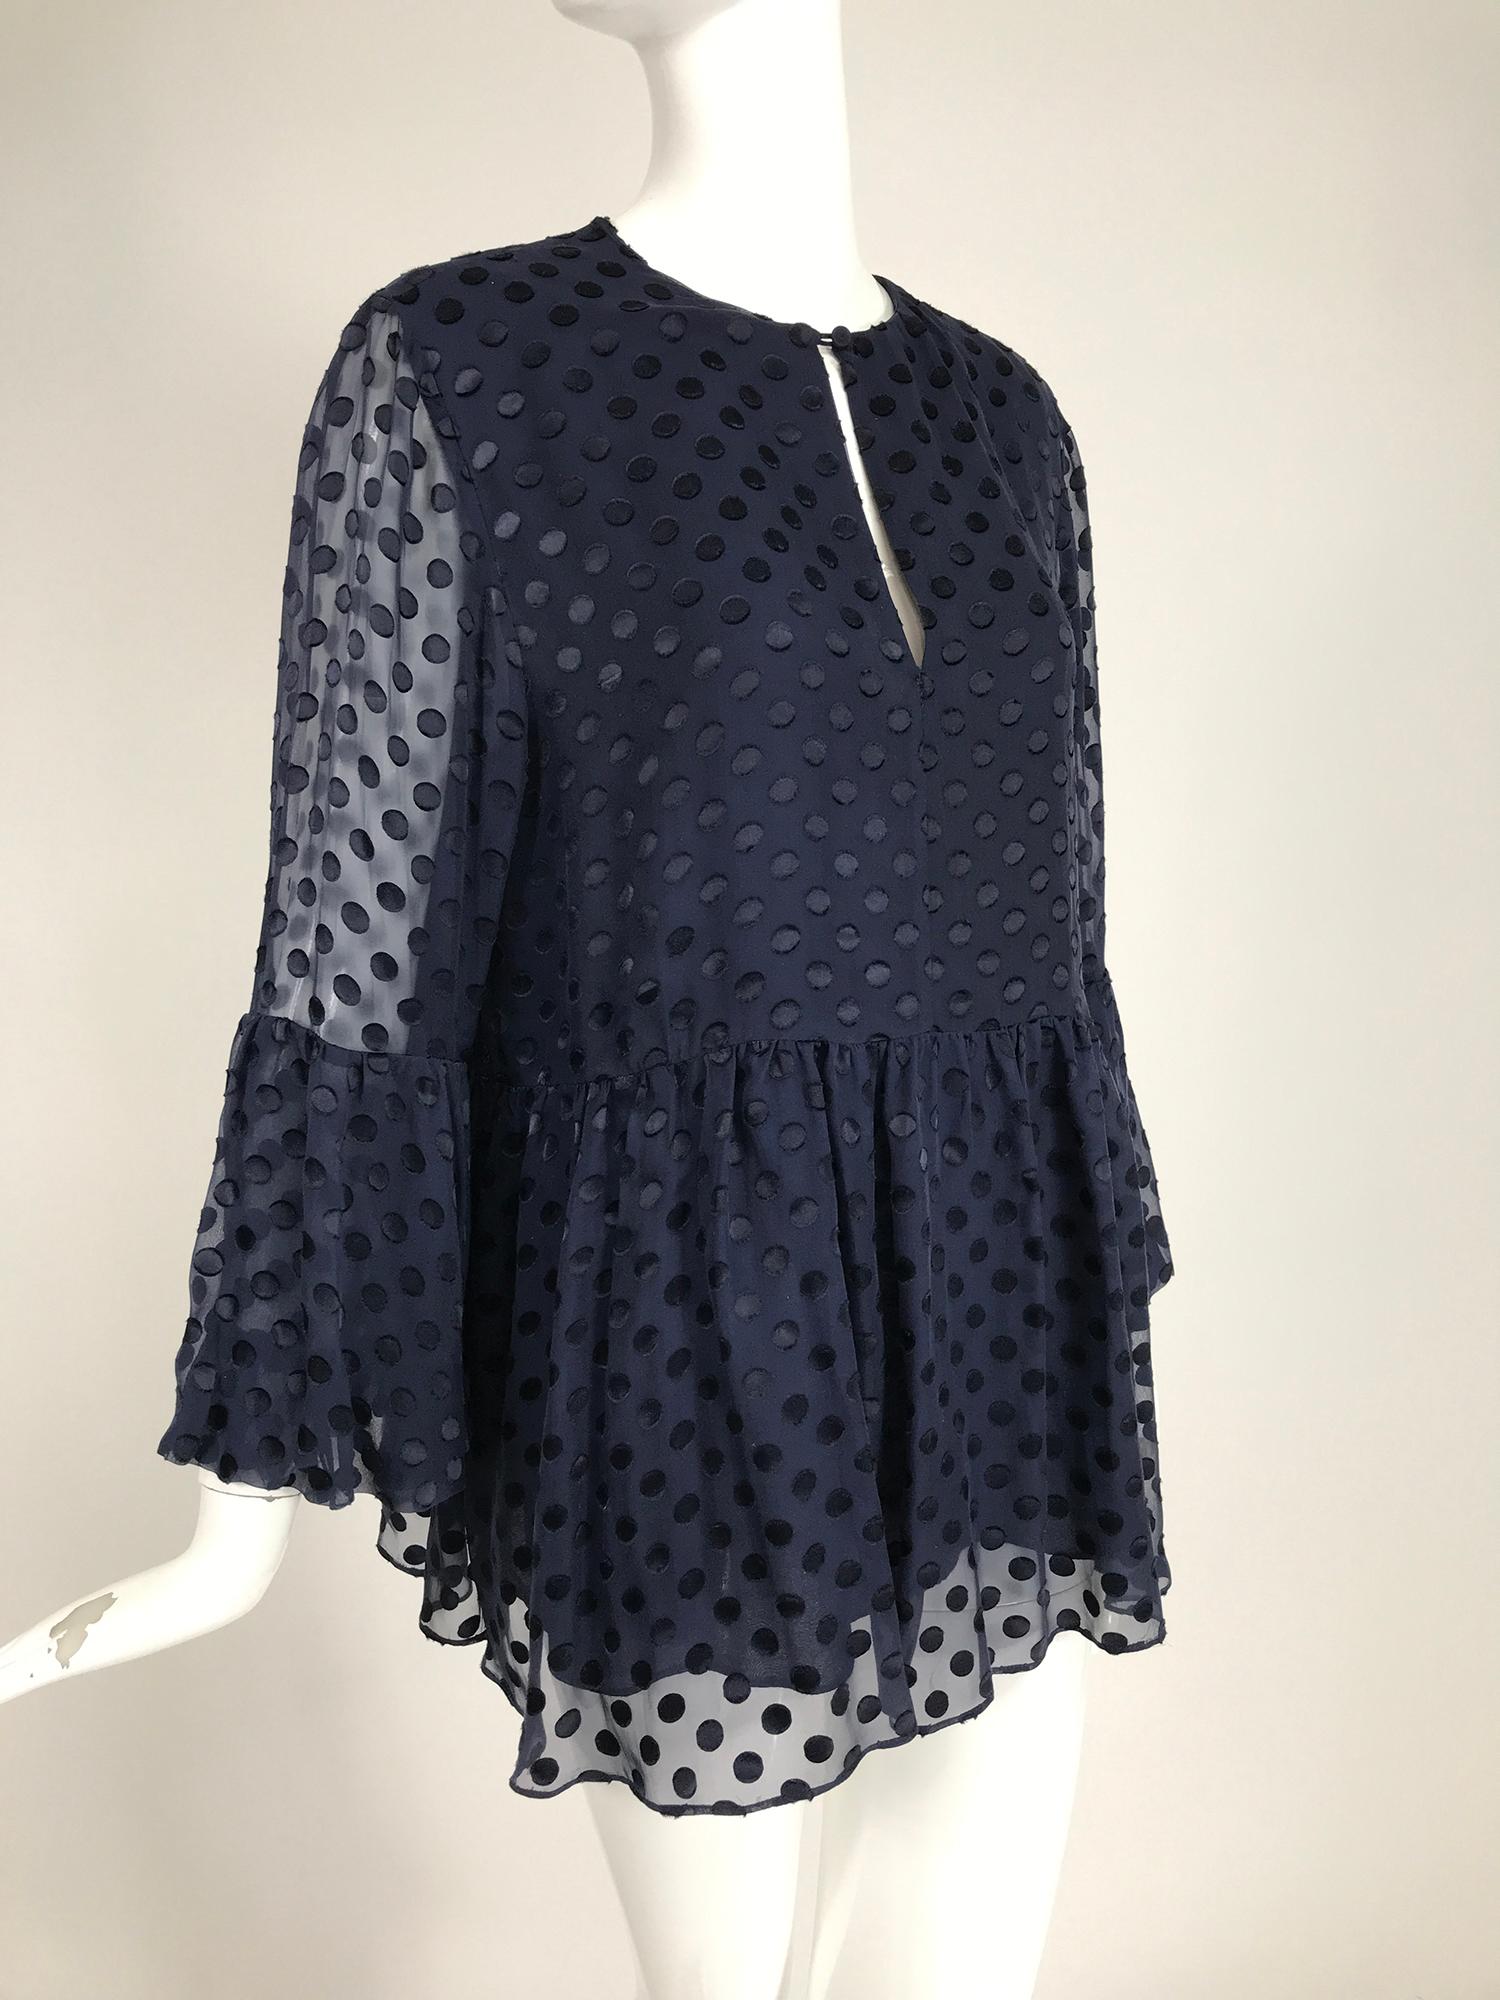 Carolina Herrera dark navy blue dot, voided velvet ruffle sleeve top. Only the dots have a silky velvety nap, the other areas of the fabric are sheer. Pull on top has a front neck vent, empire waist with gathered skirt below. Th long sleeves have